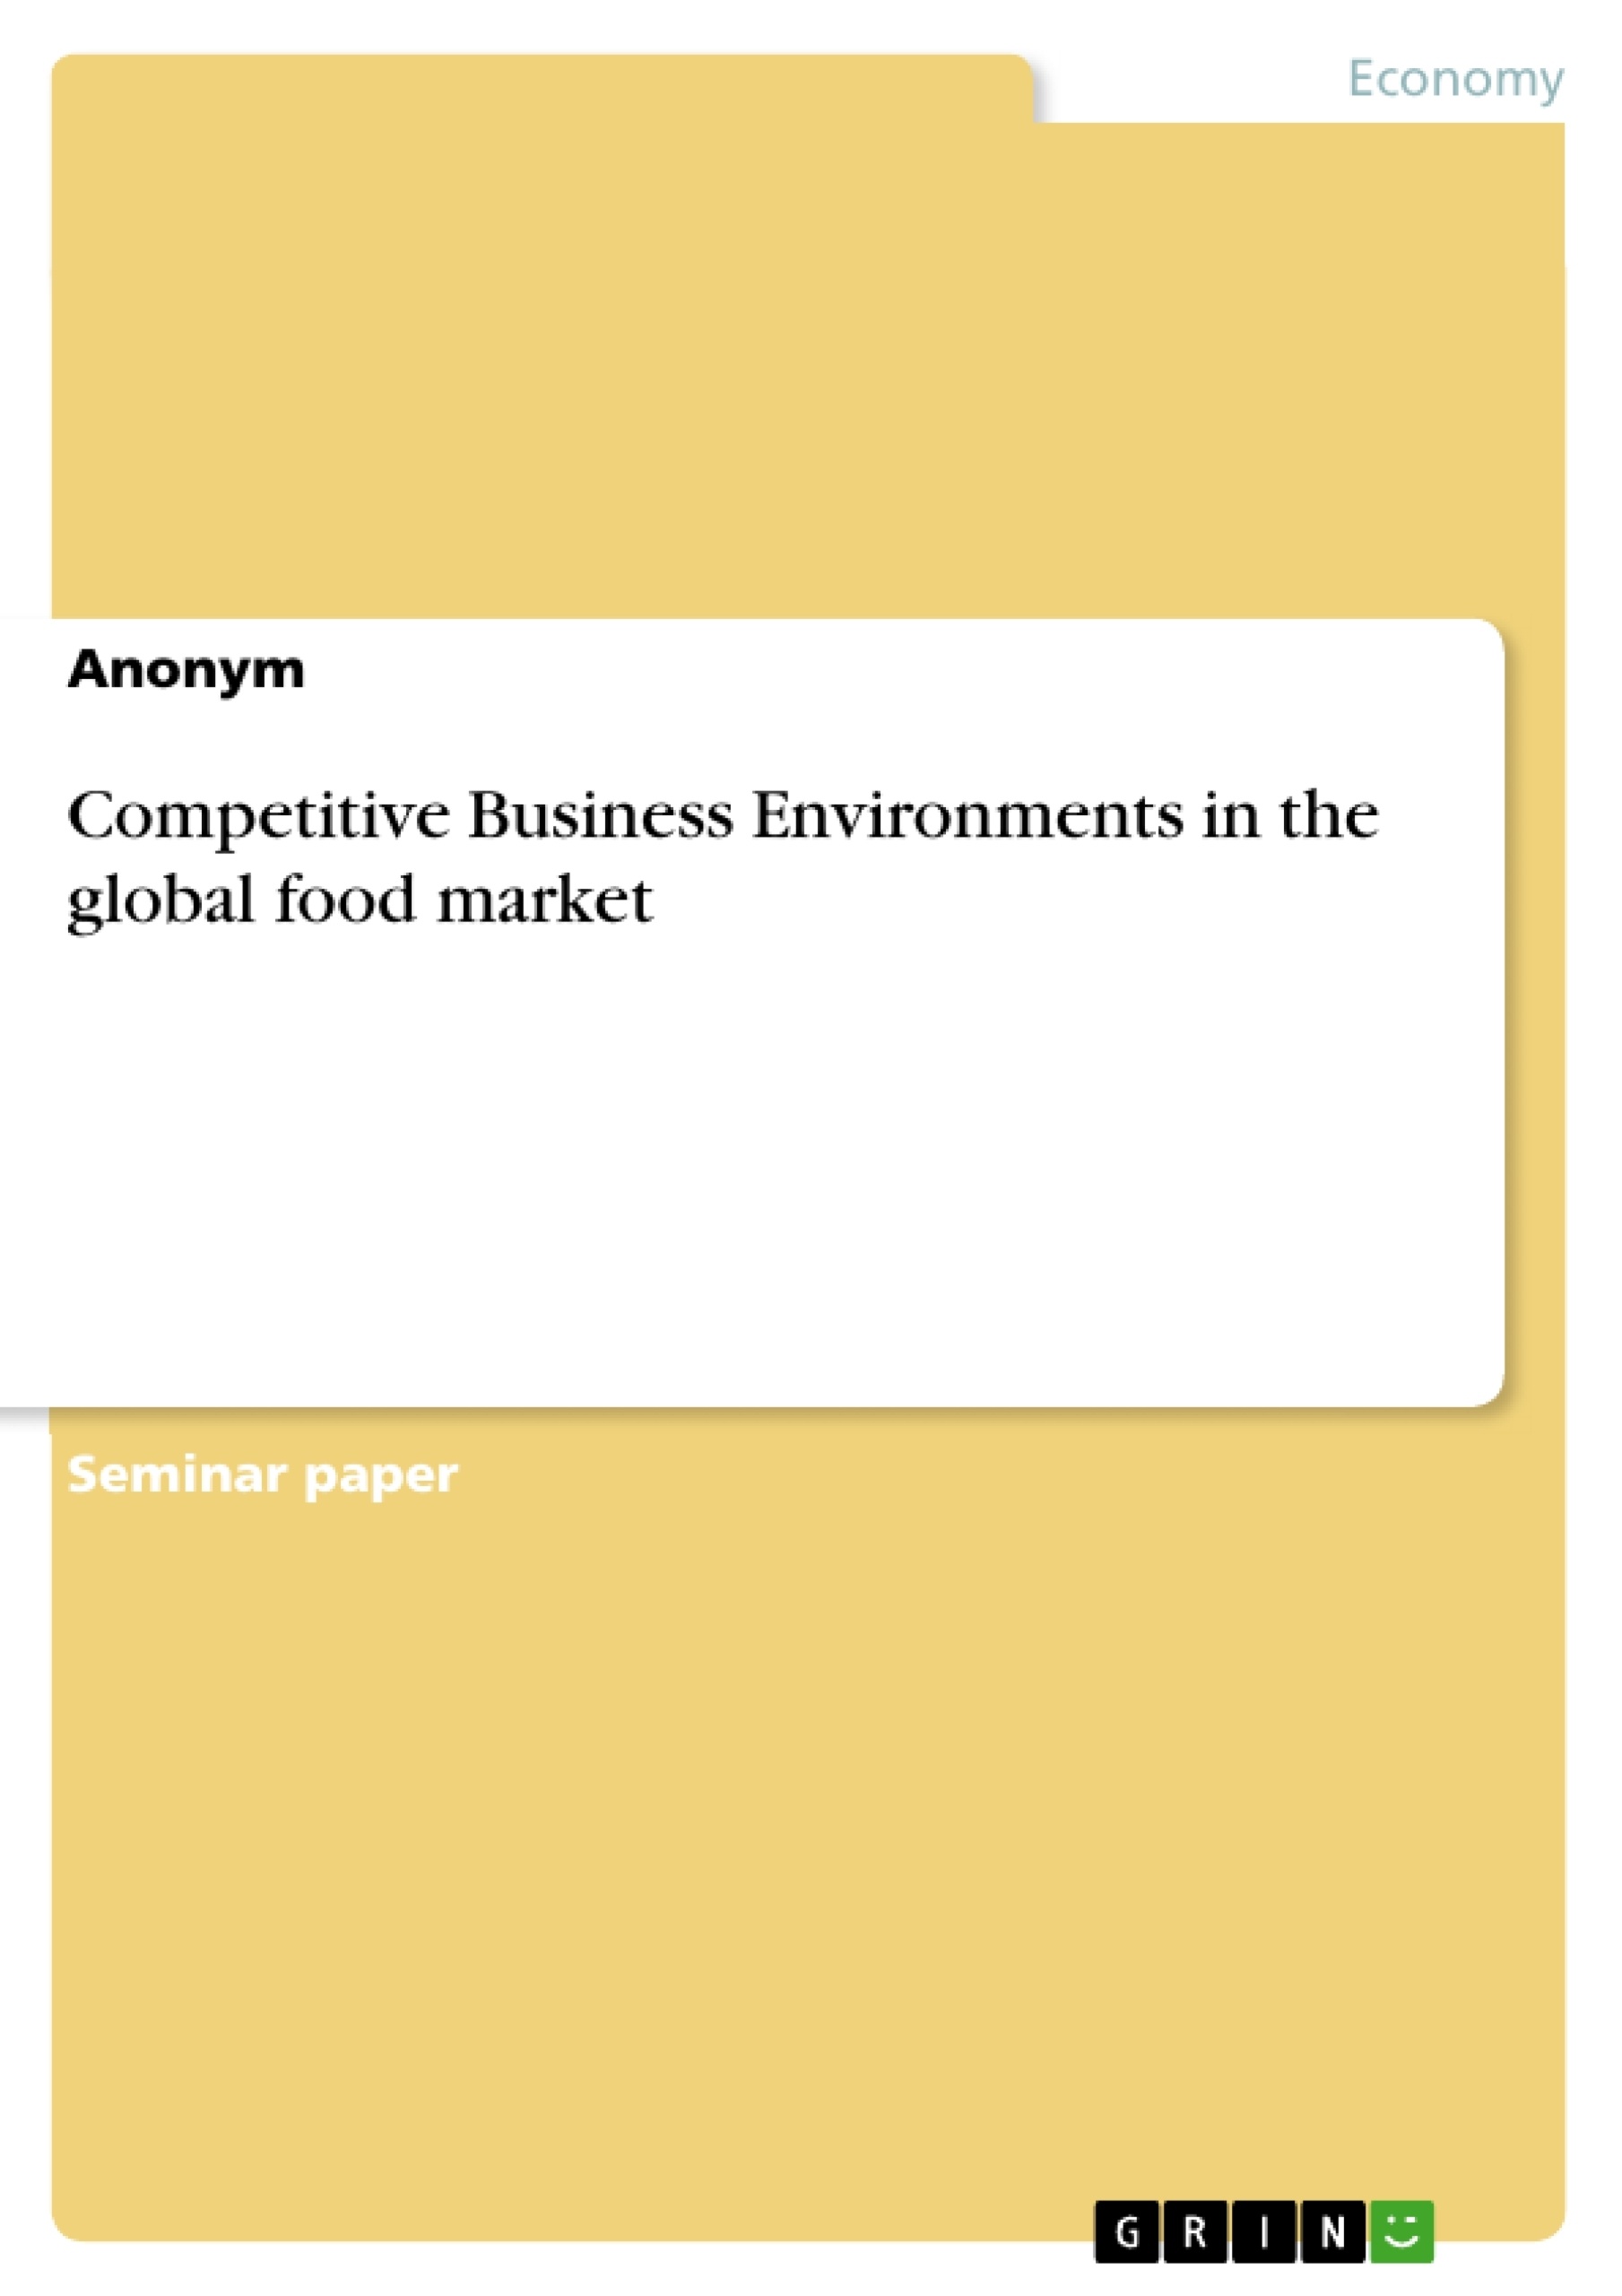 Title: Competitive Business Environments in the global food market